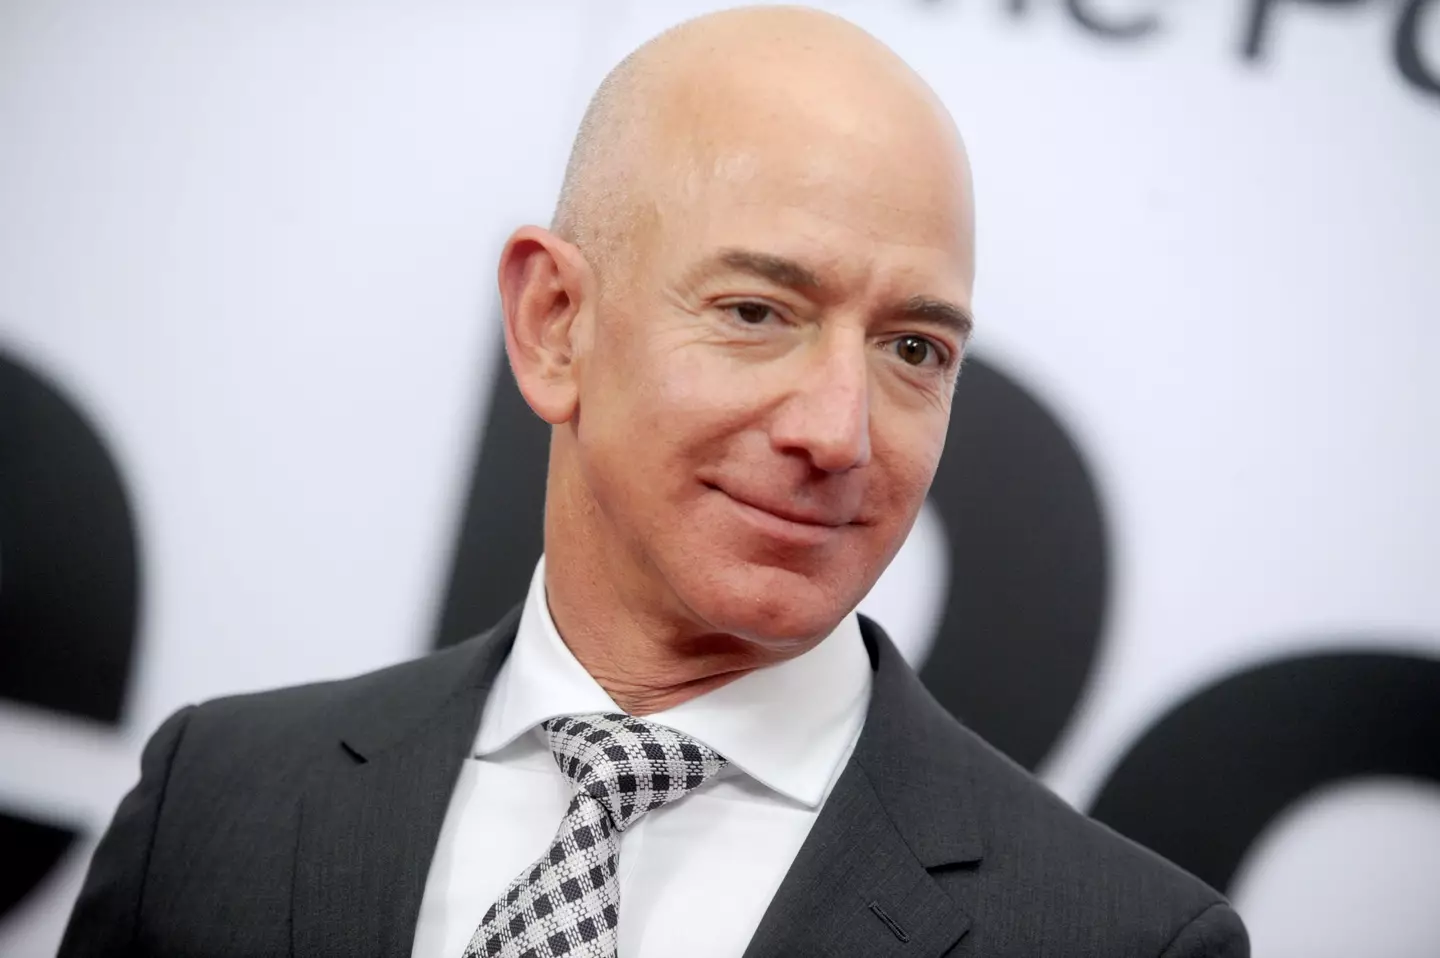 Bezos has been knocked from second place.